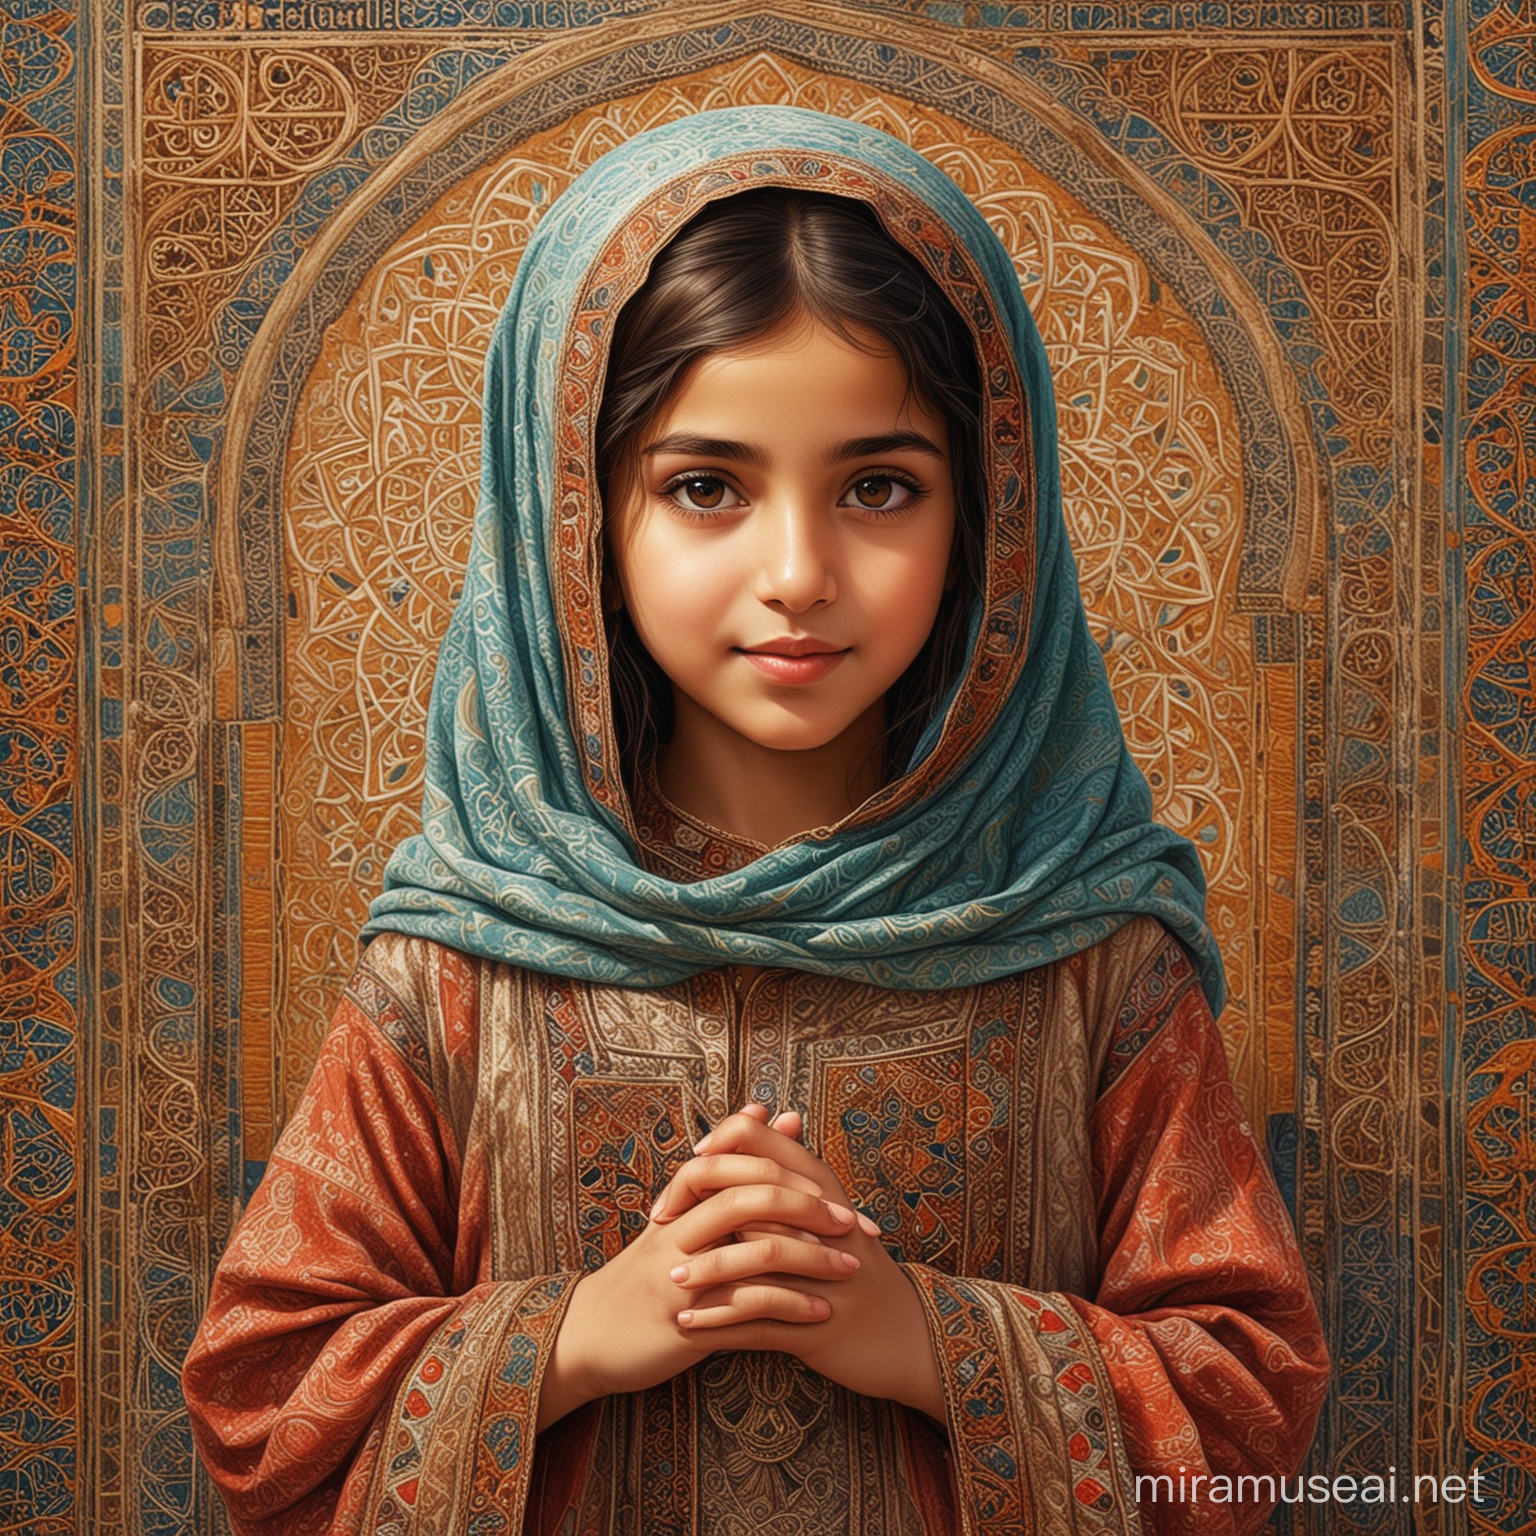 very cute little Arab girl of rare beauty, folk clothes, background with Arabic patterns, fantasy art, fine lines, textures, ink painting, acrylic, vintage, patchwork, detailed illustration of a collection of short stories, surrealism, Tyndall effect 9, dynamic lighting, sfumato, perfect proportions, high detail, full body